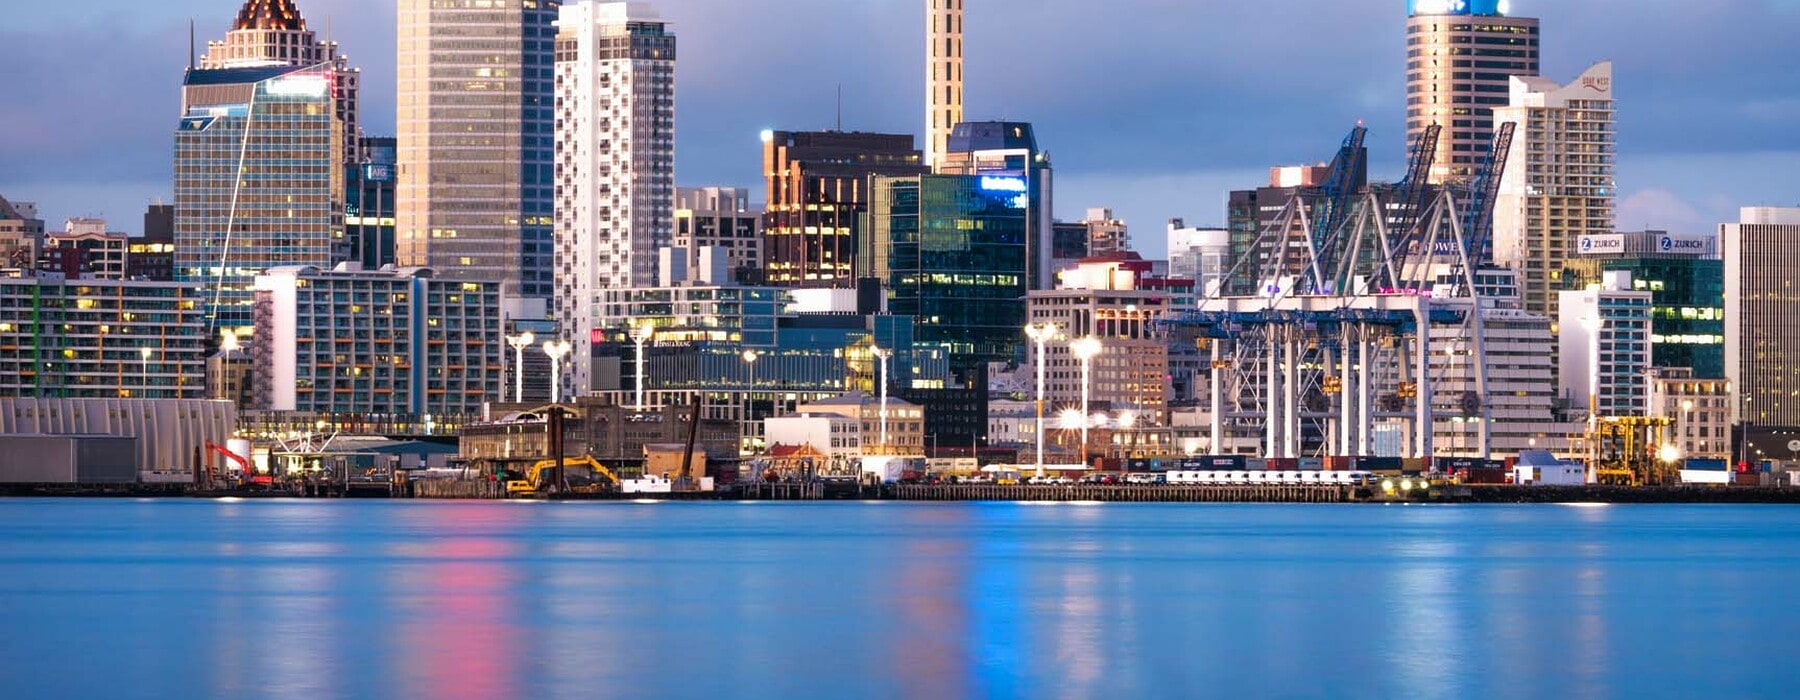 Auckland's CBD seen from across the water at dawn, with the Sky Tower in the centre of the image.